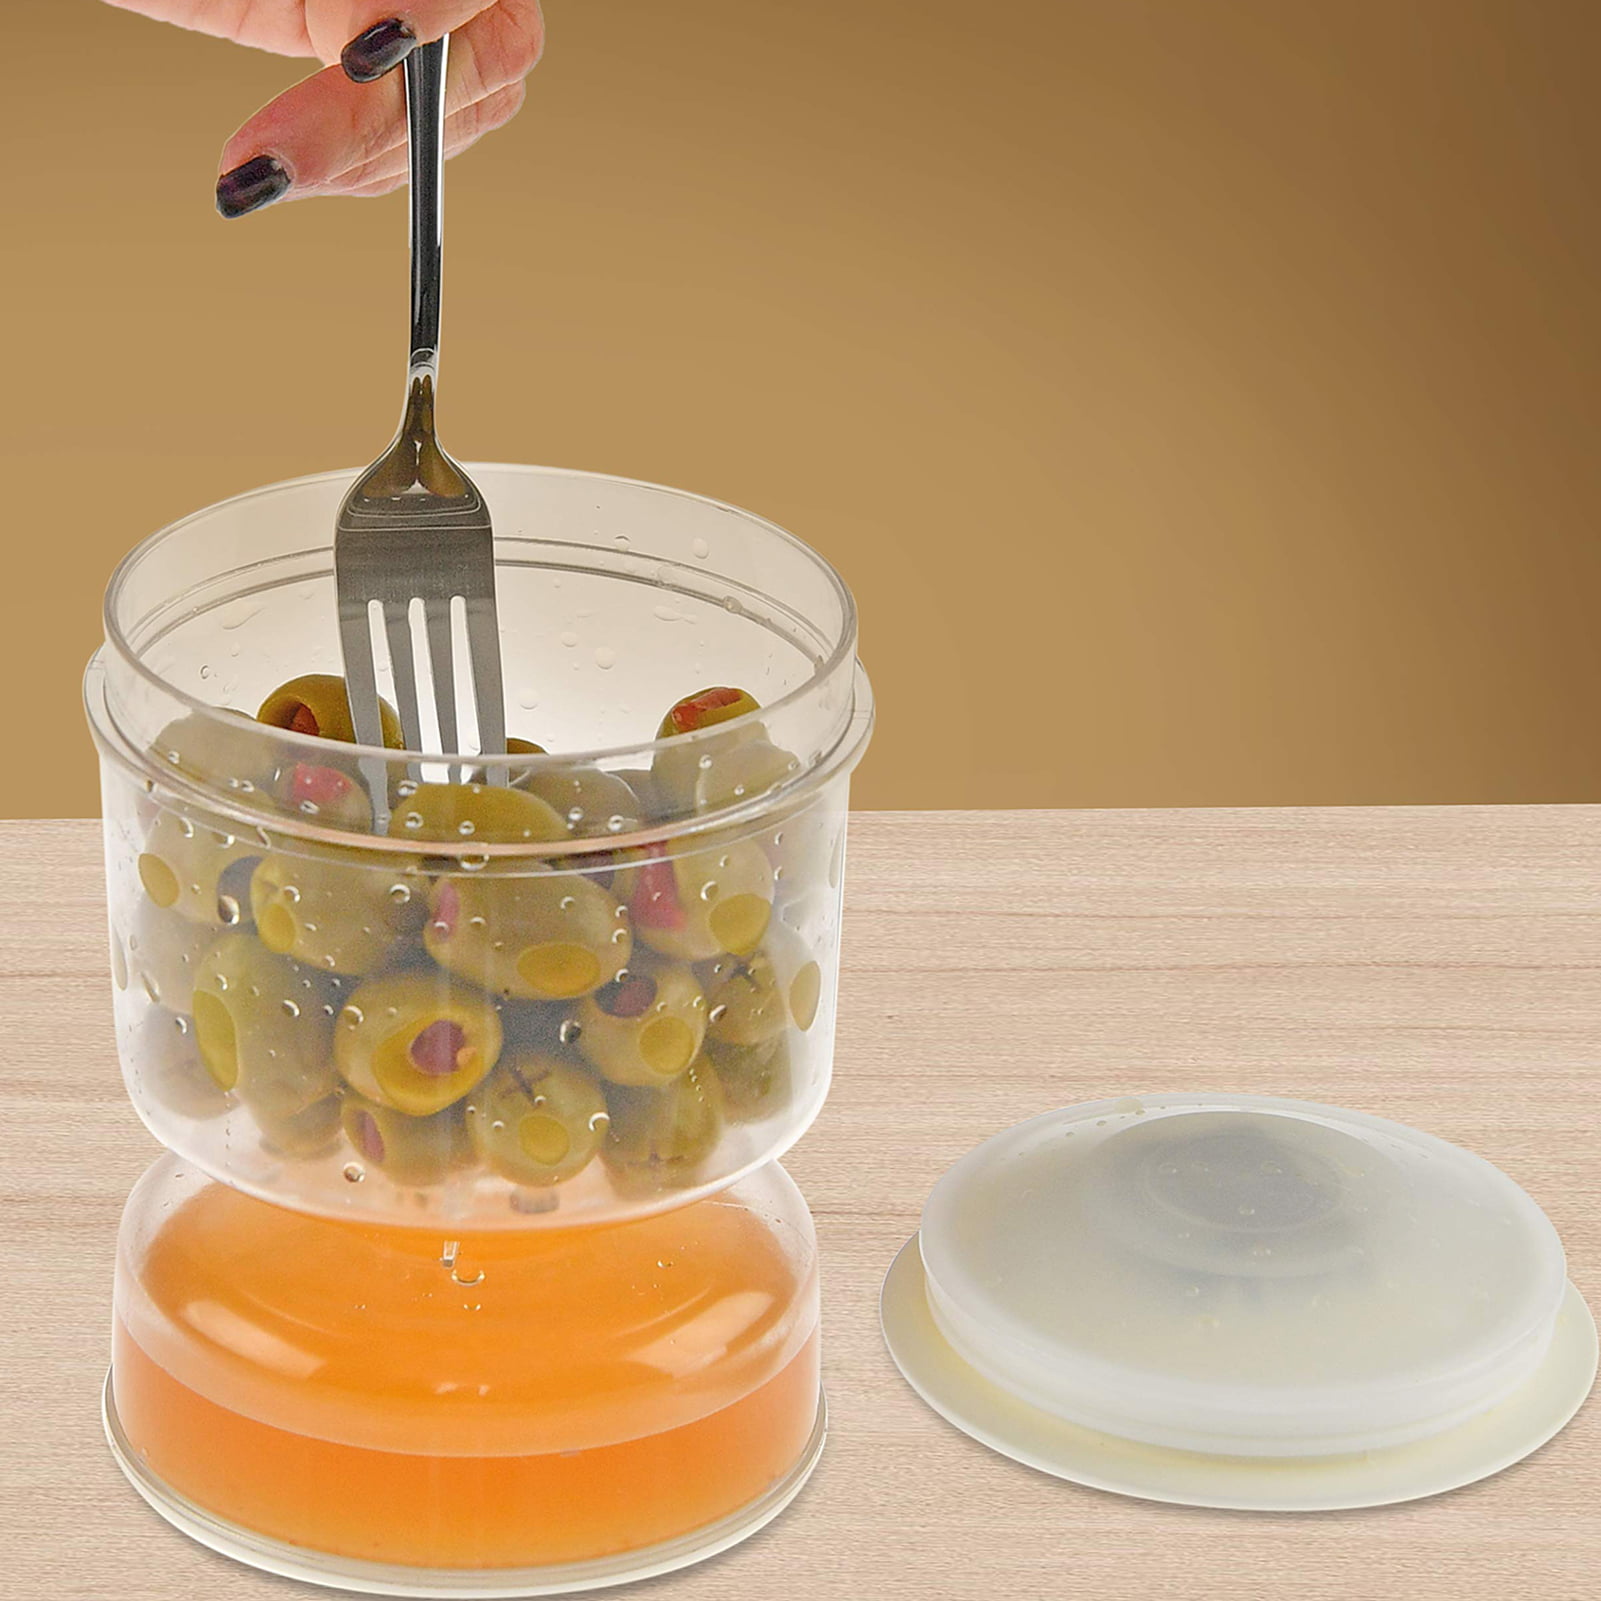 NBPOWER Pickle and Olives Hourglass Jar, 250ml Juice Separator